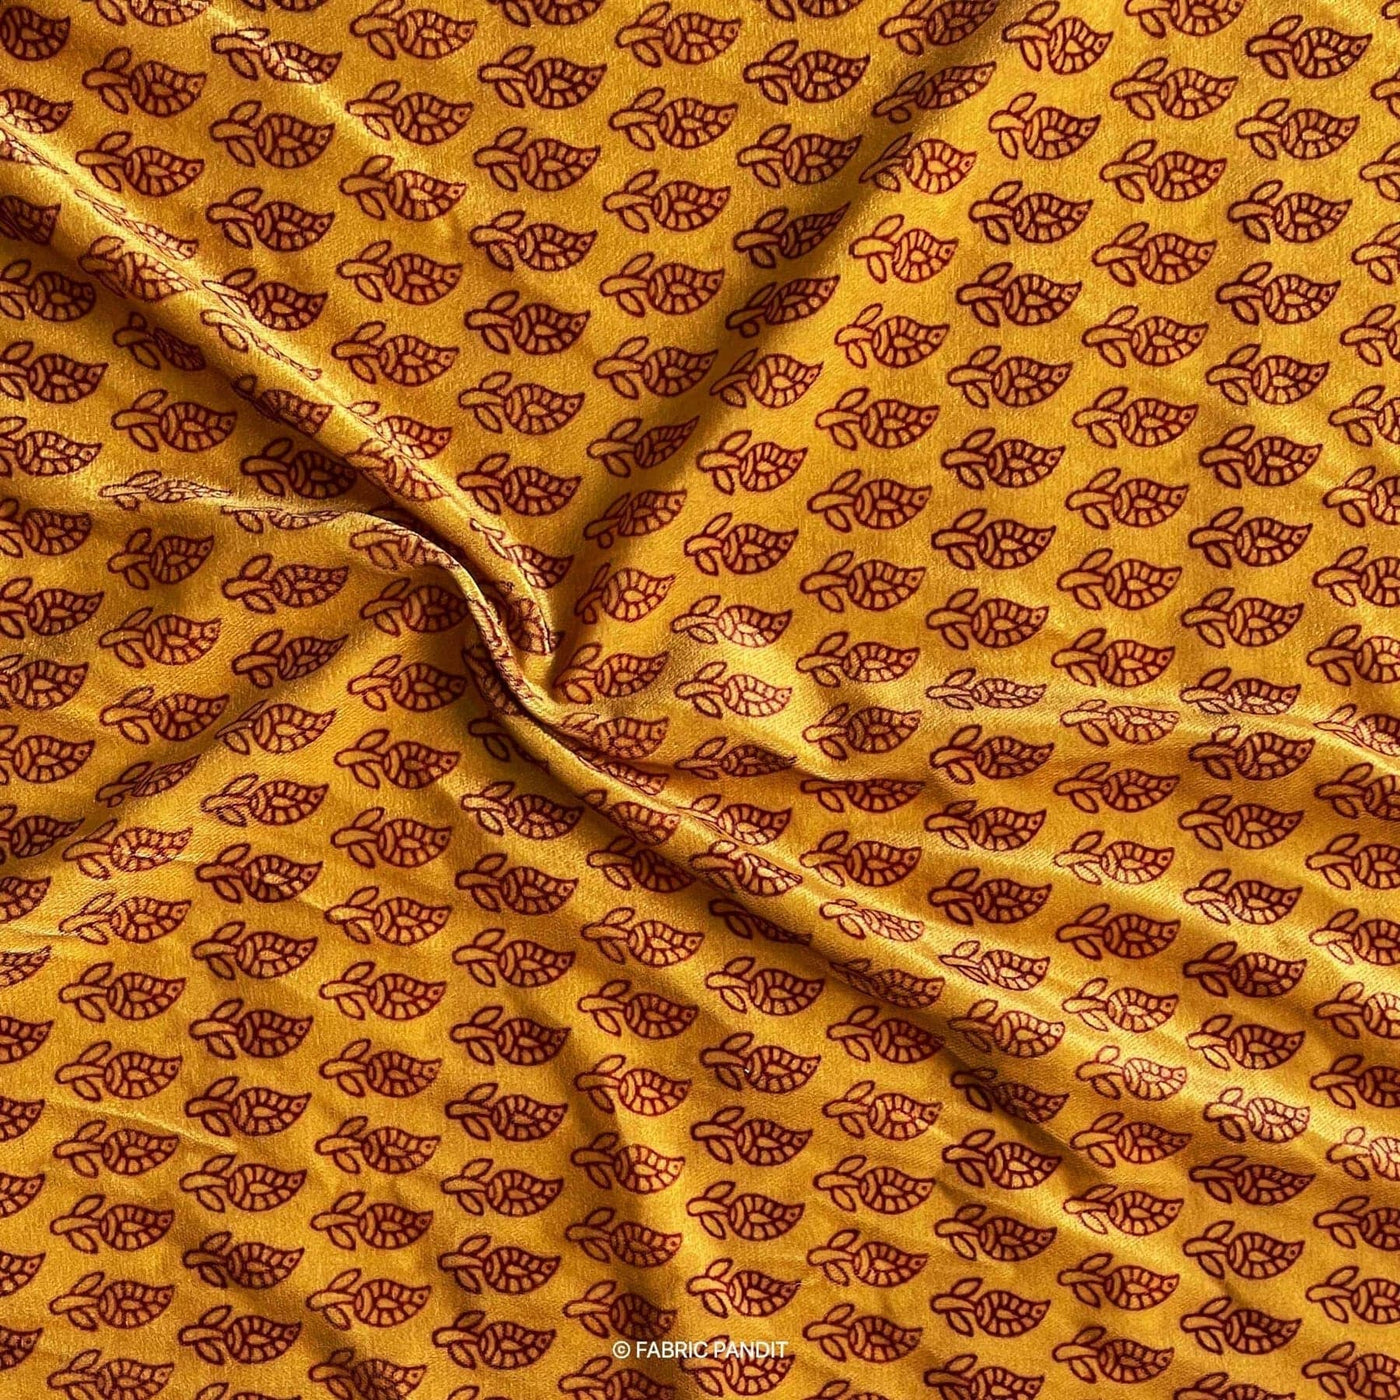 Fabric Pandit Fabric Golden Yellow Paisley Bagh Digital Print Pure Velvet Fabric (Width 44 Inches)